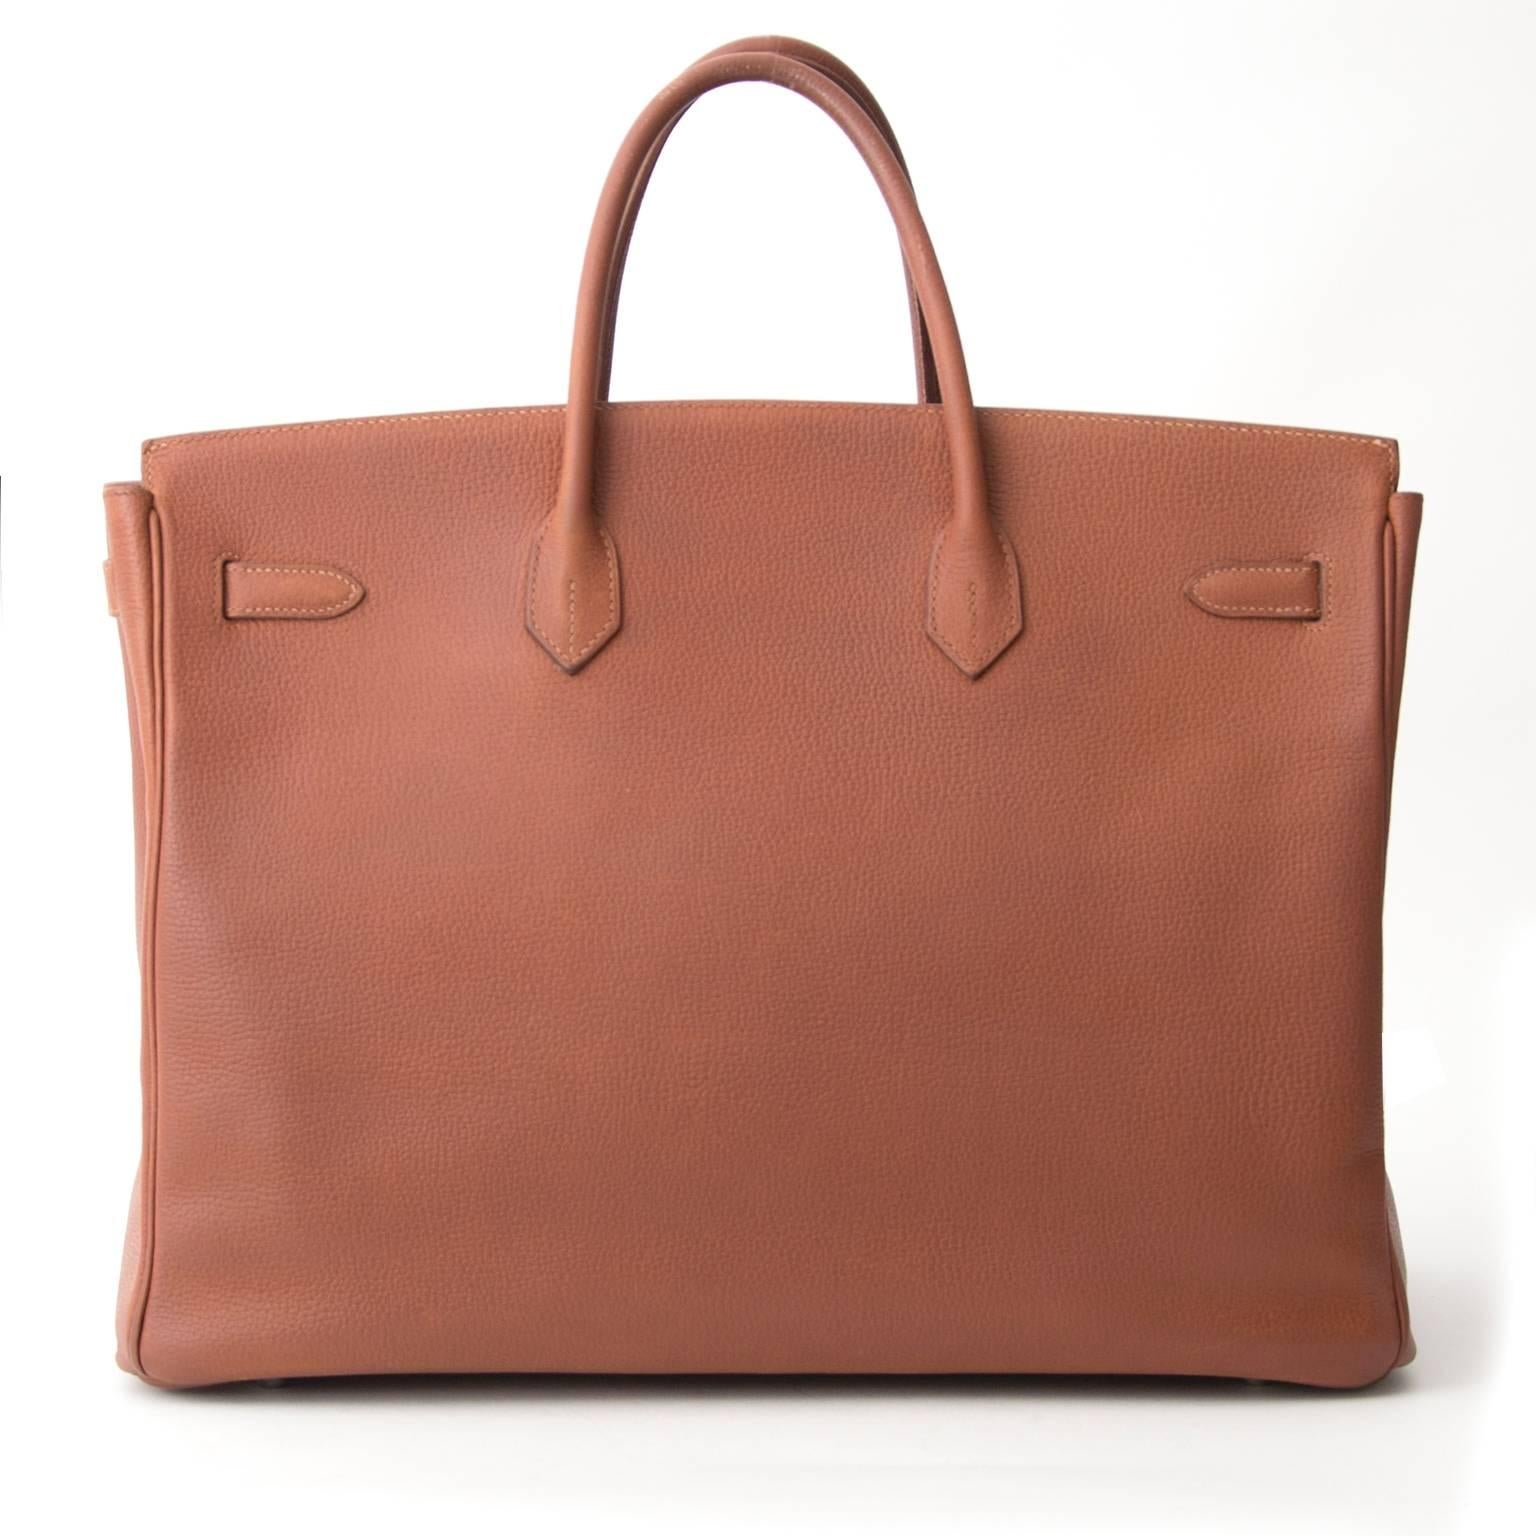 Hermes Birkin Marron Veau Fjord.

Fjord leather, is known for its fair softness and matte texture and has a high water resistance. The Hermes Birkin is now the symbol of class and fashion. Its highly recognizable design makes it a staple of the